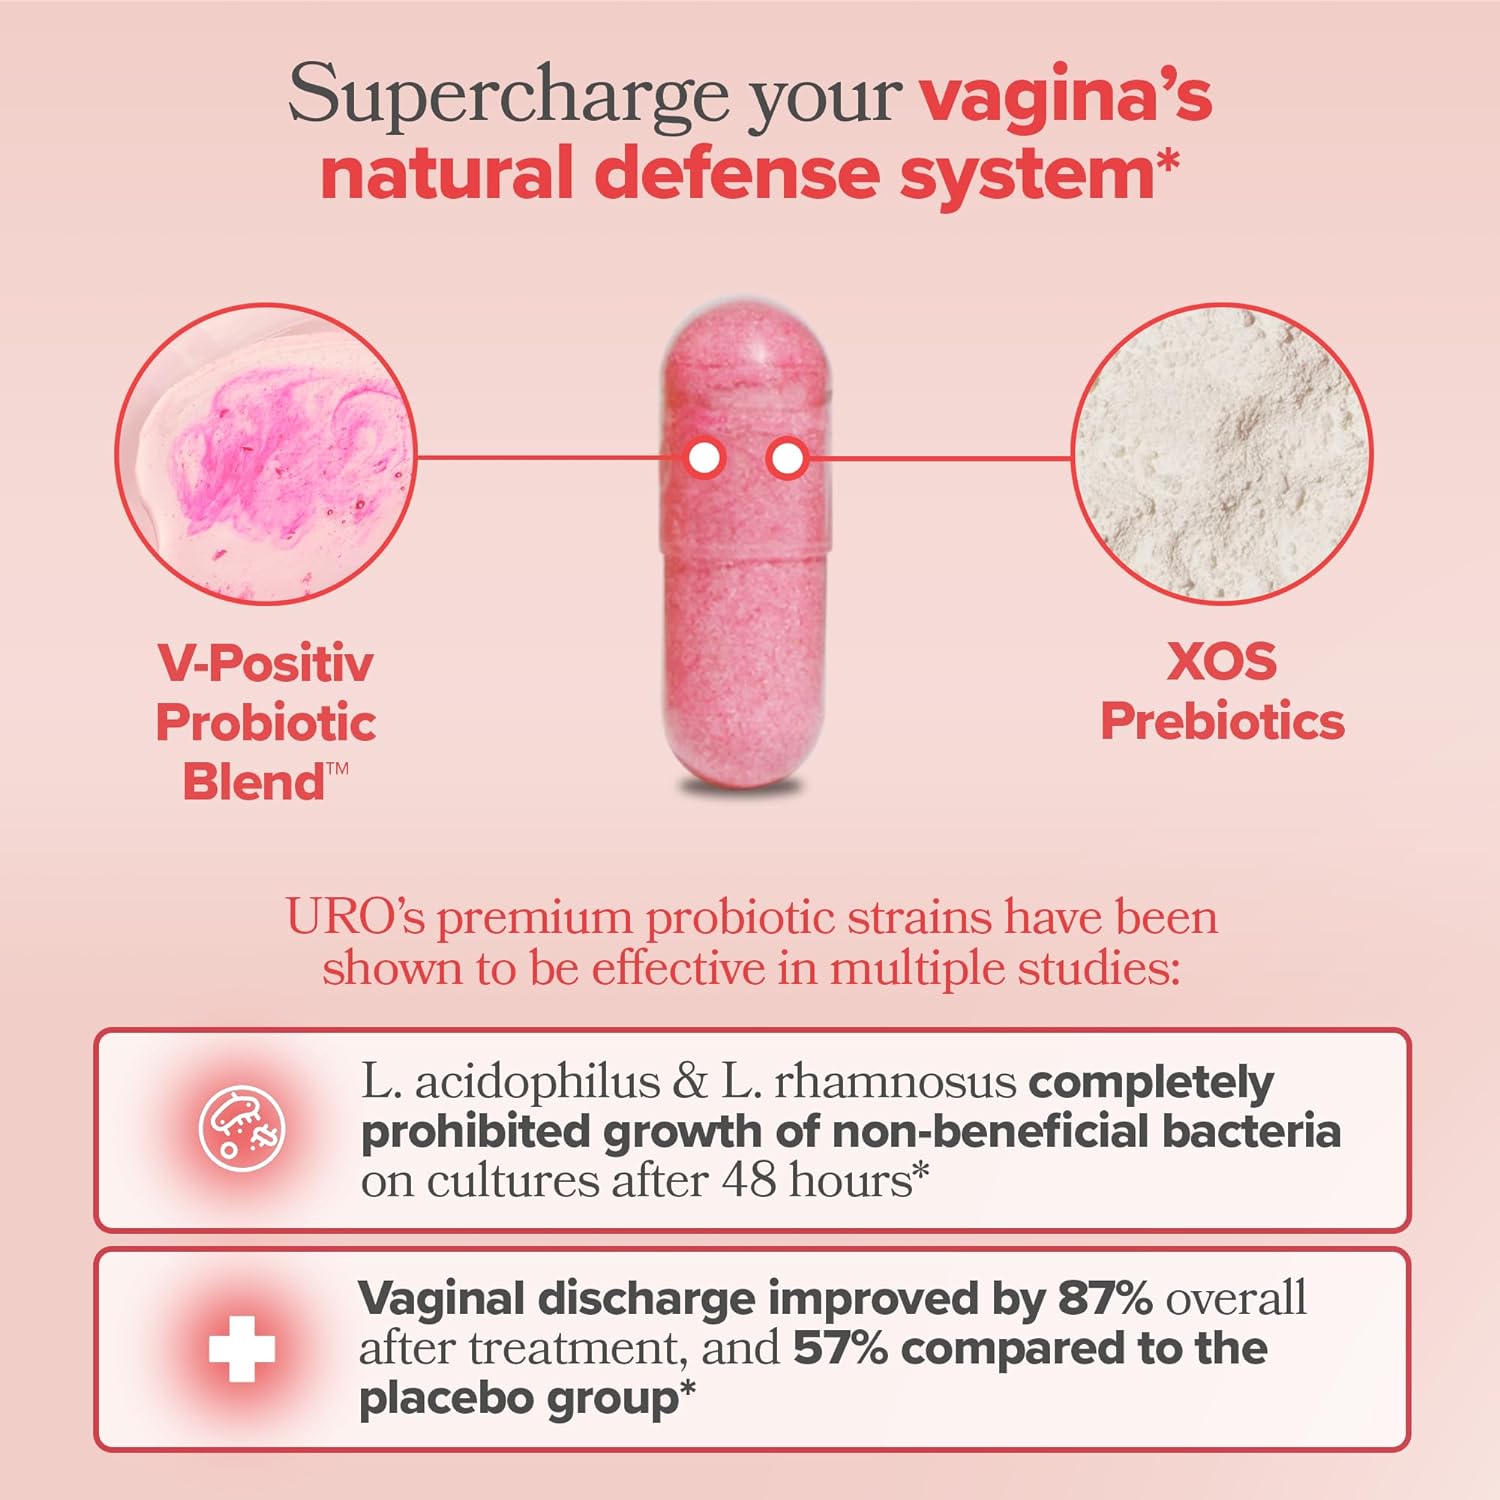 Improve vaginal discharge by 87%